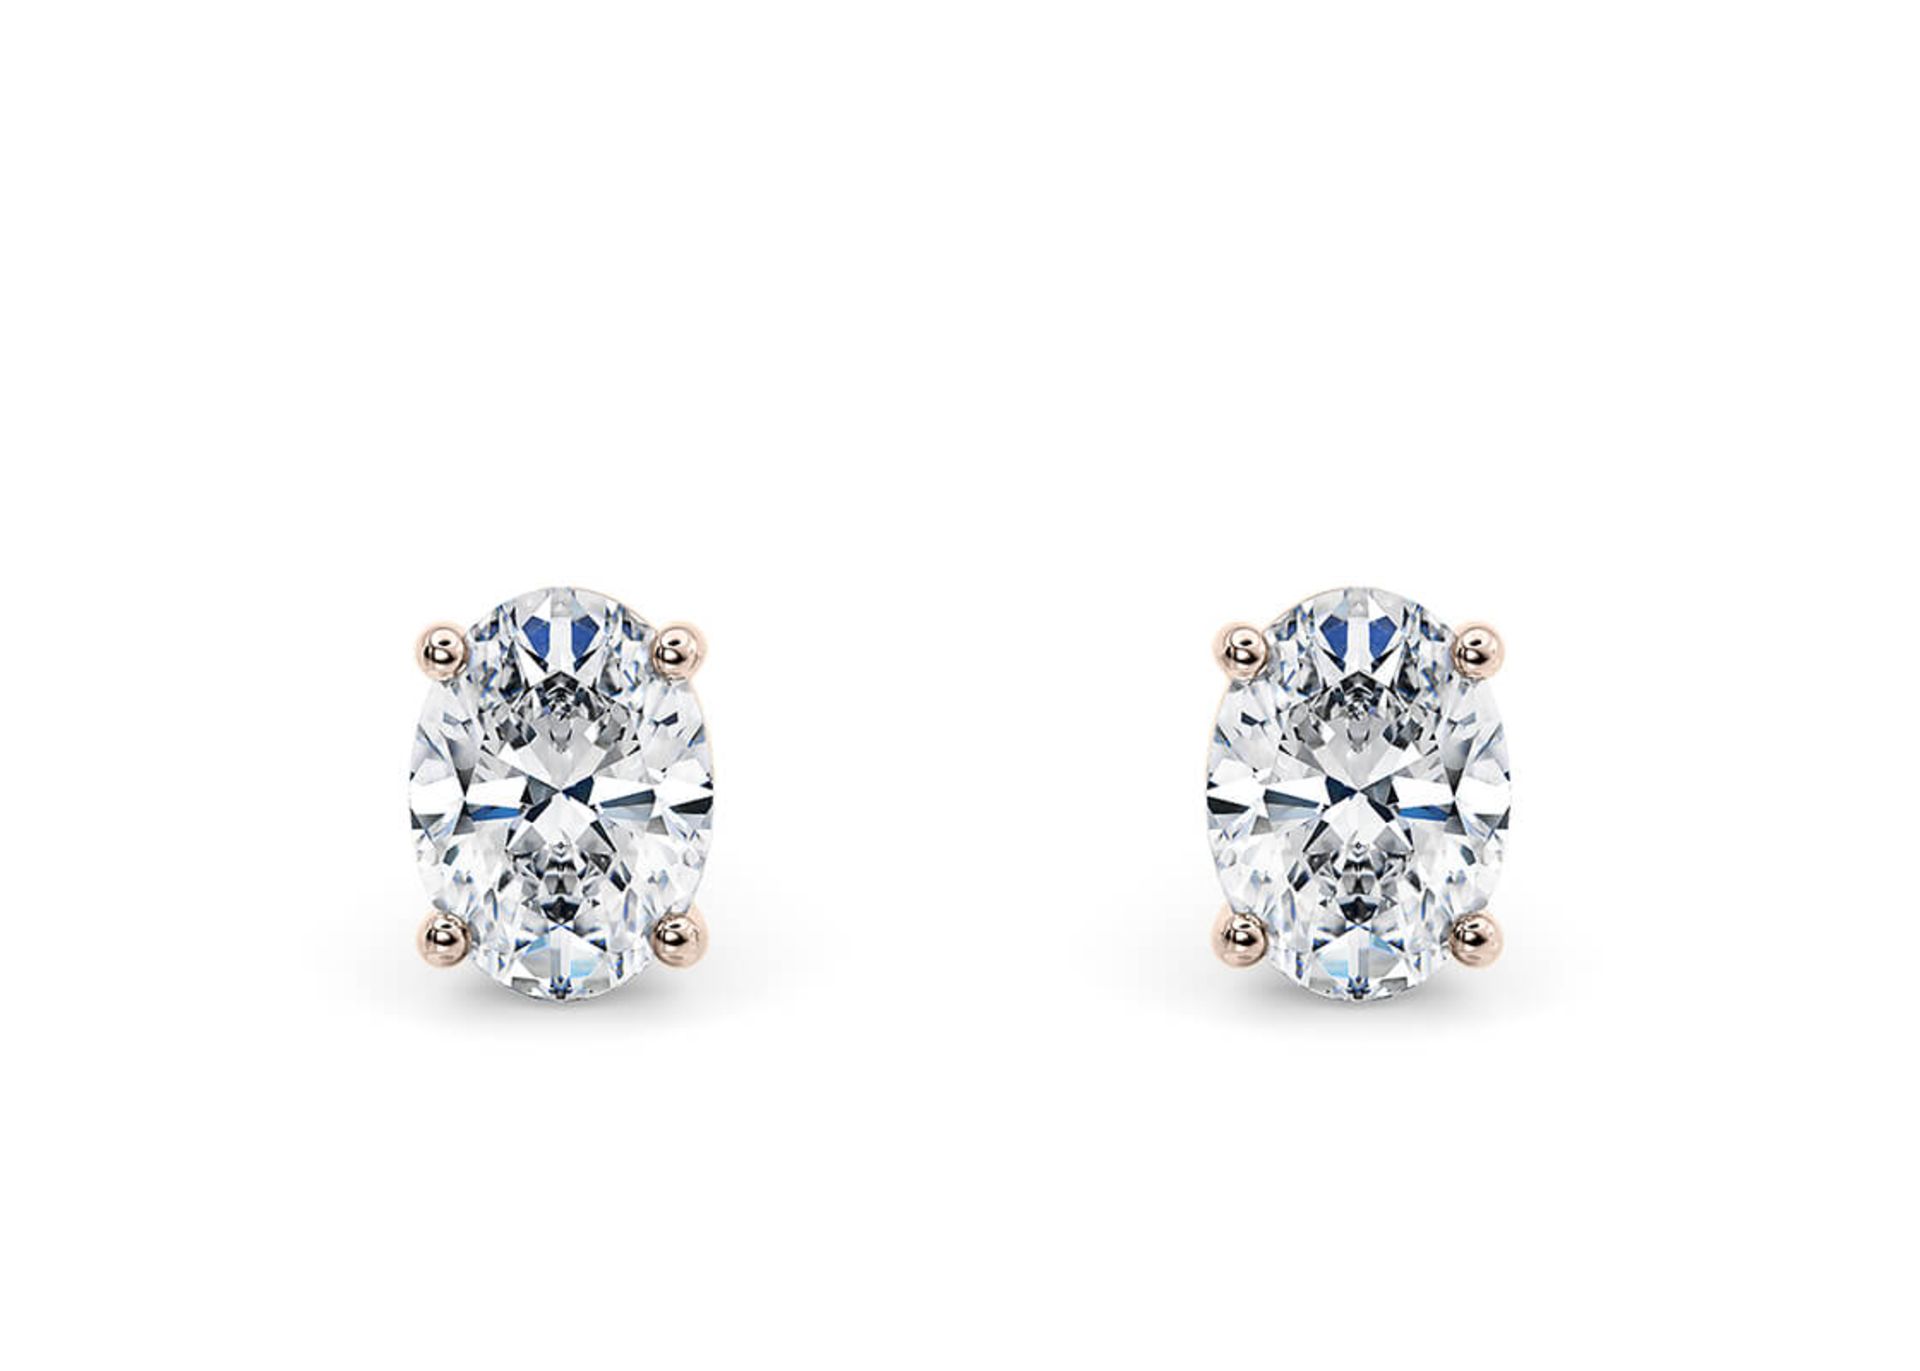 Oval Cut 3.00 Carat Natural Diamond Earrings Set in 18kt Rose Gold - F Colour SI Clarity - GIA - Image 2 of 3